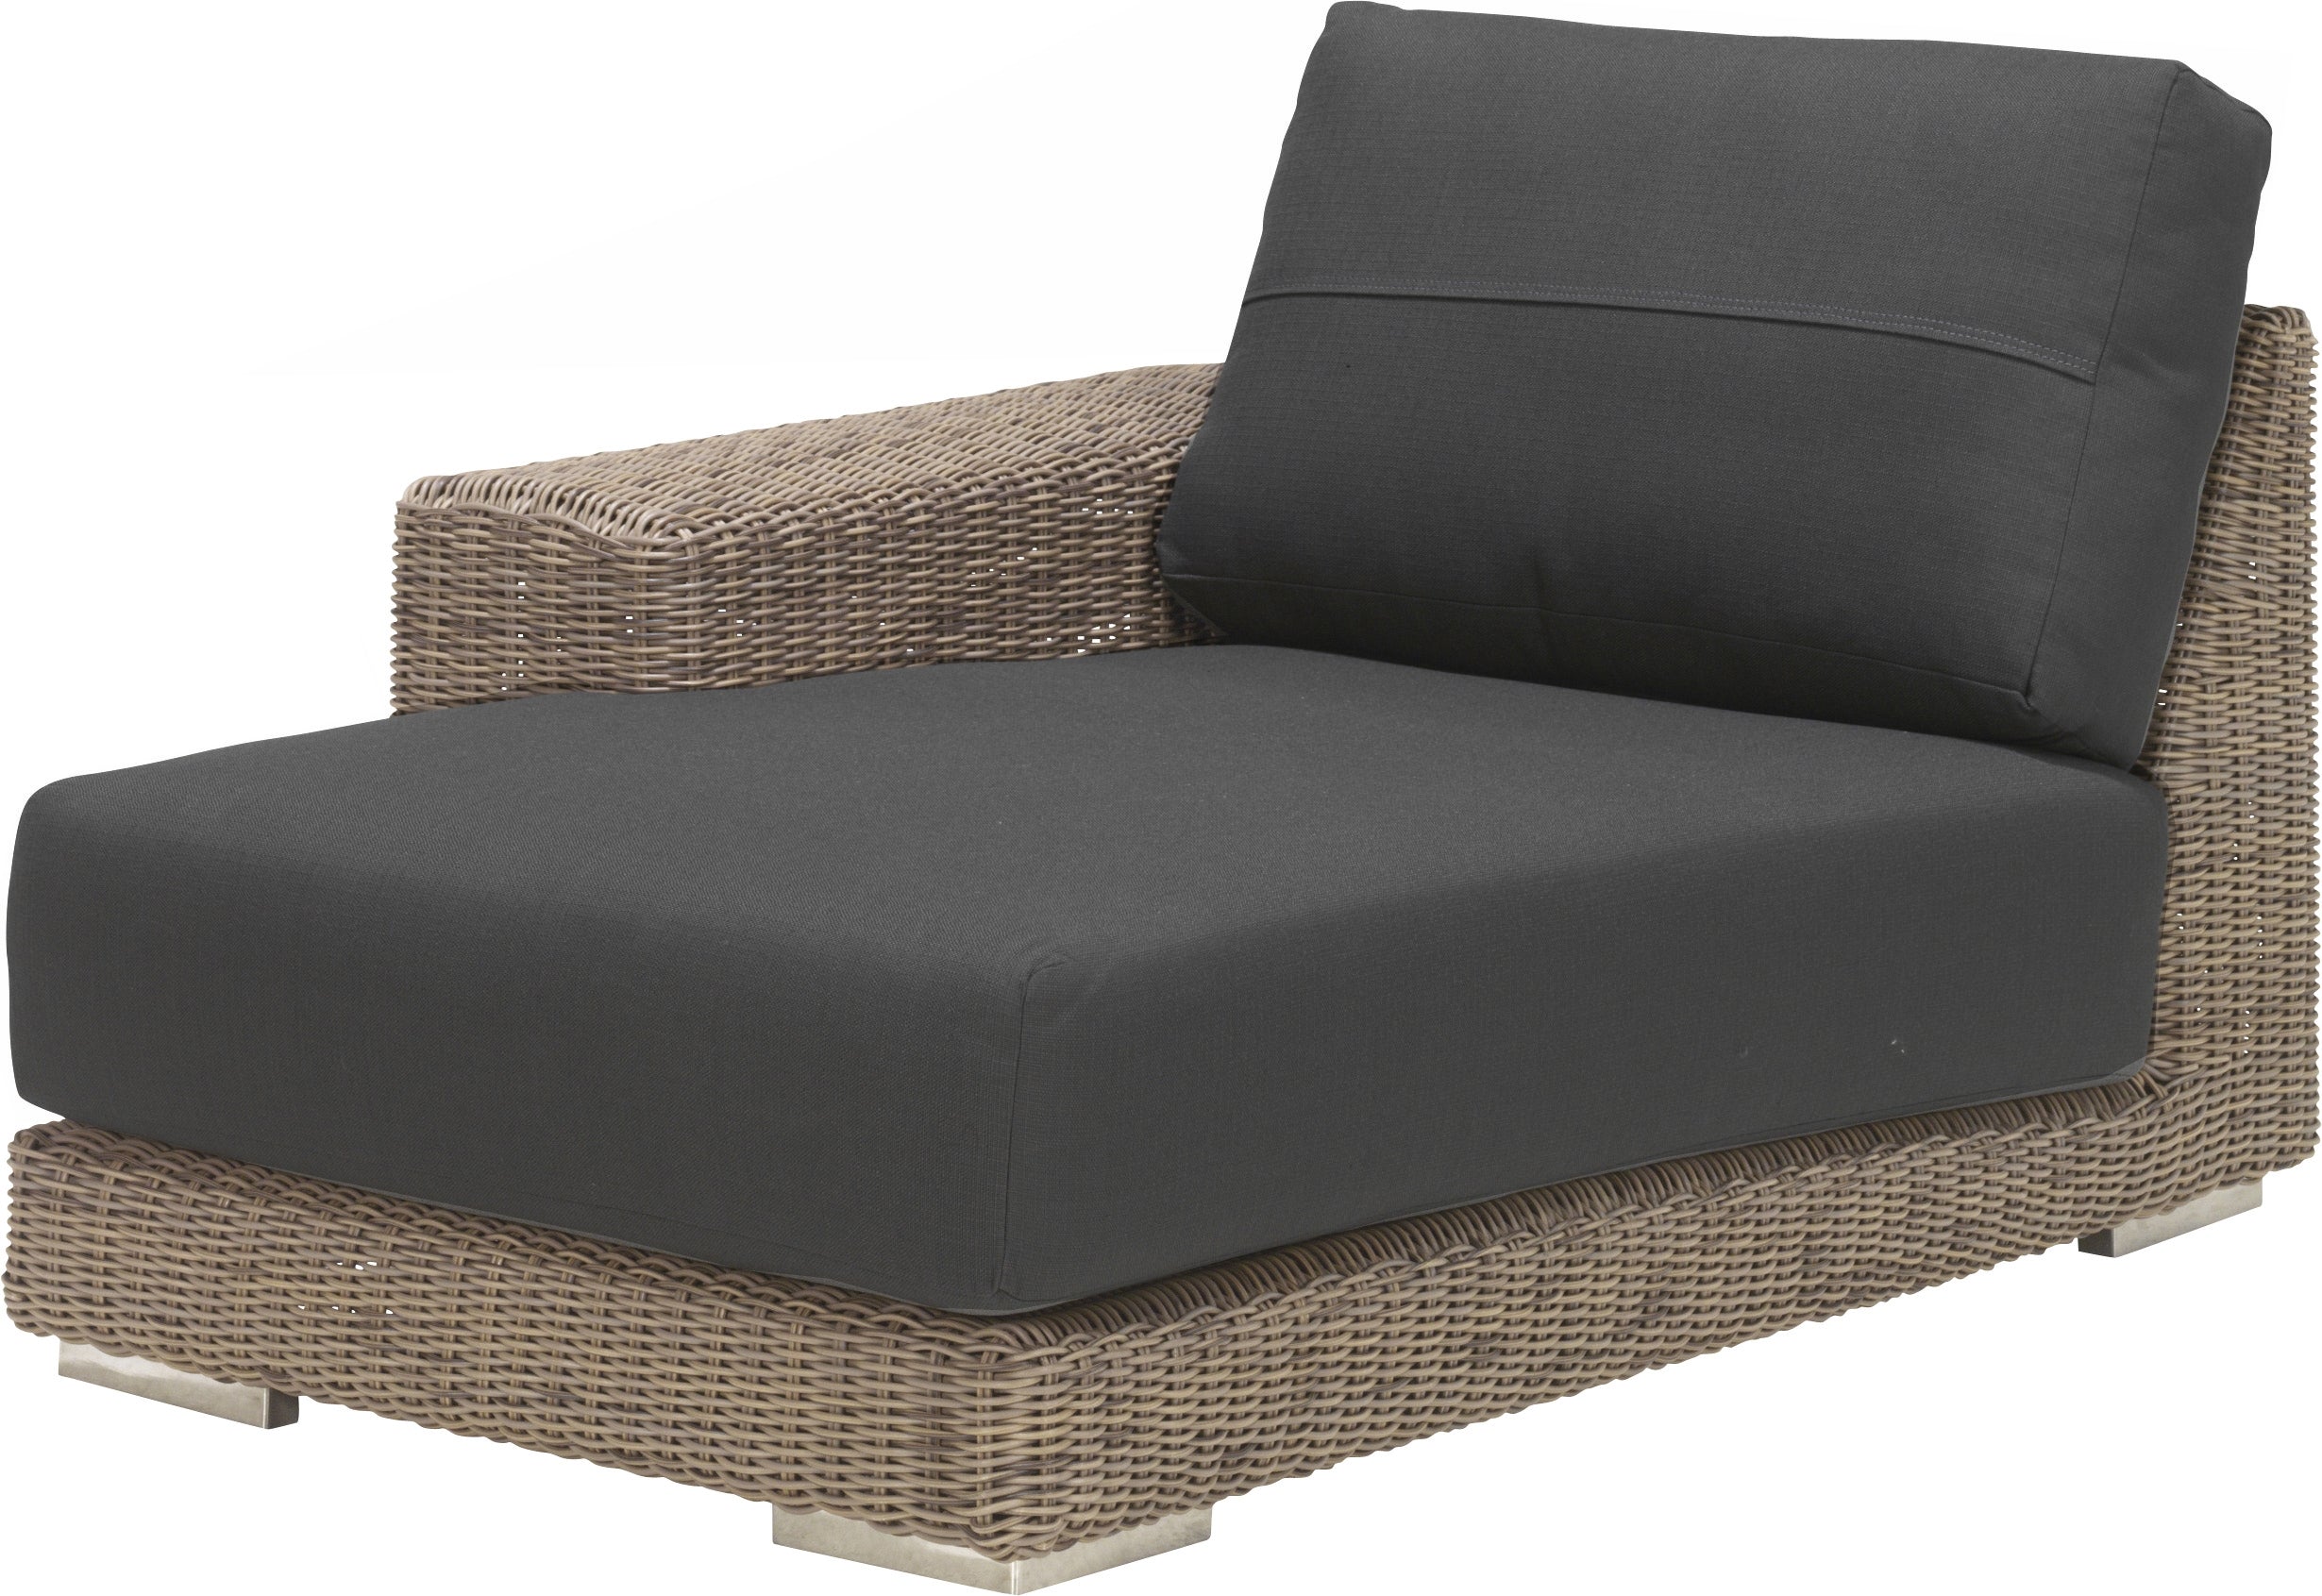 4 Seasons Outdoor Kingston Modular Chaise-Lounge Right With 2 Cushions